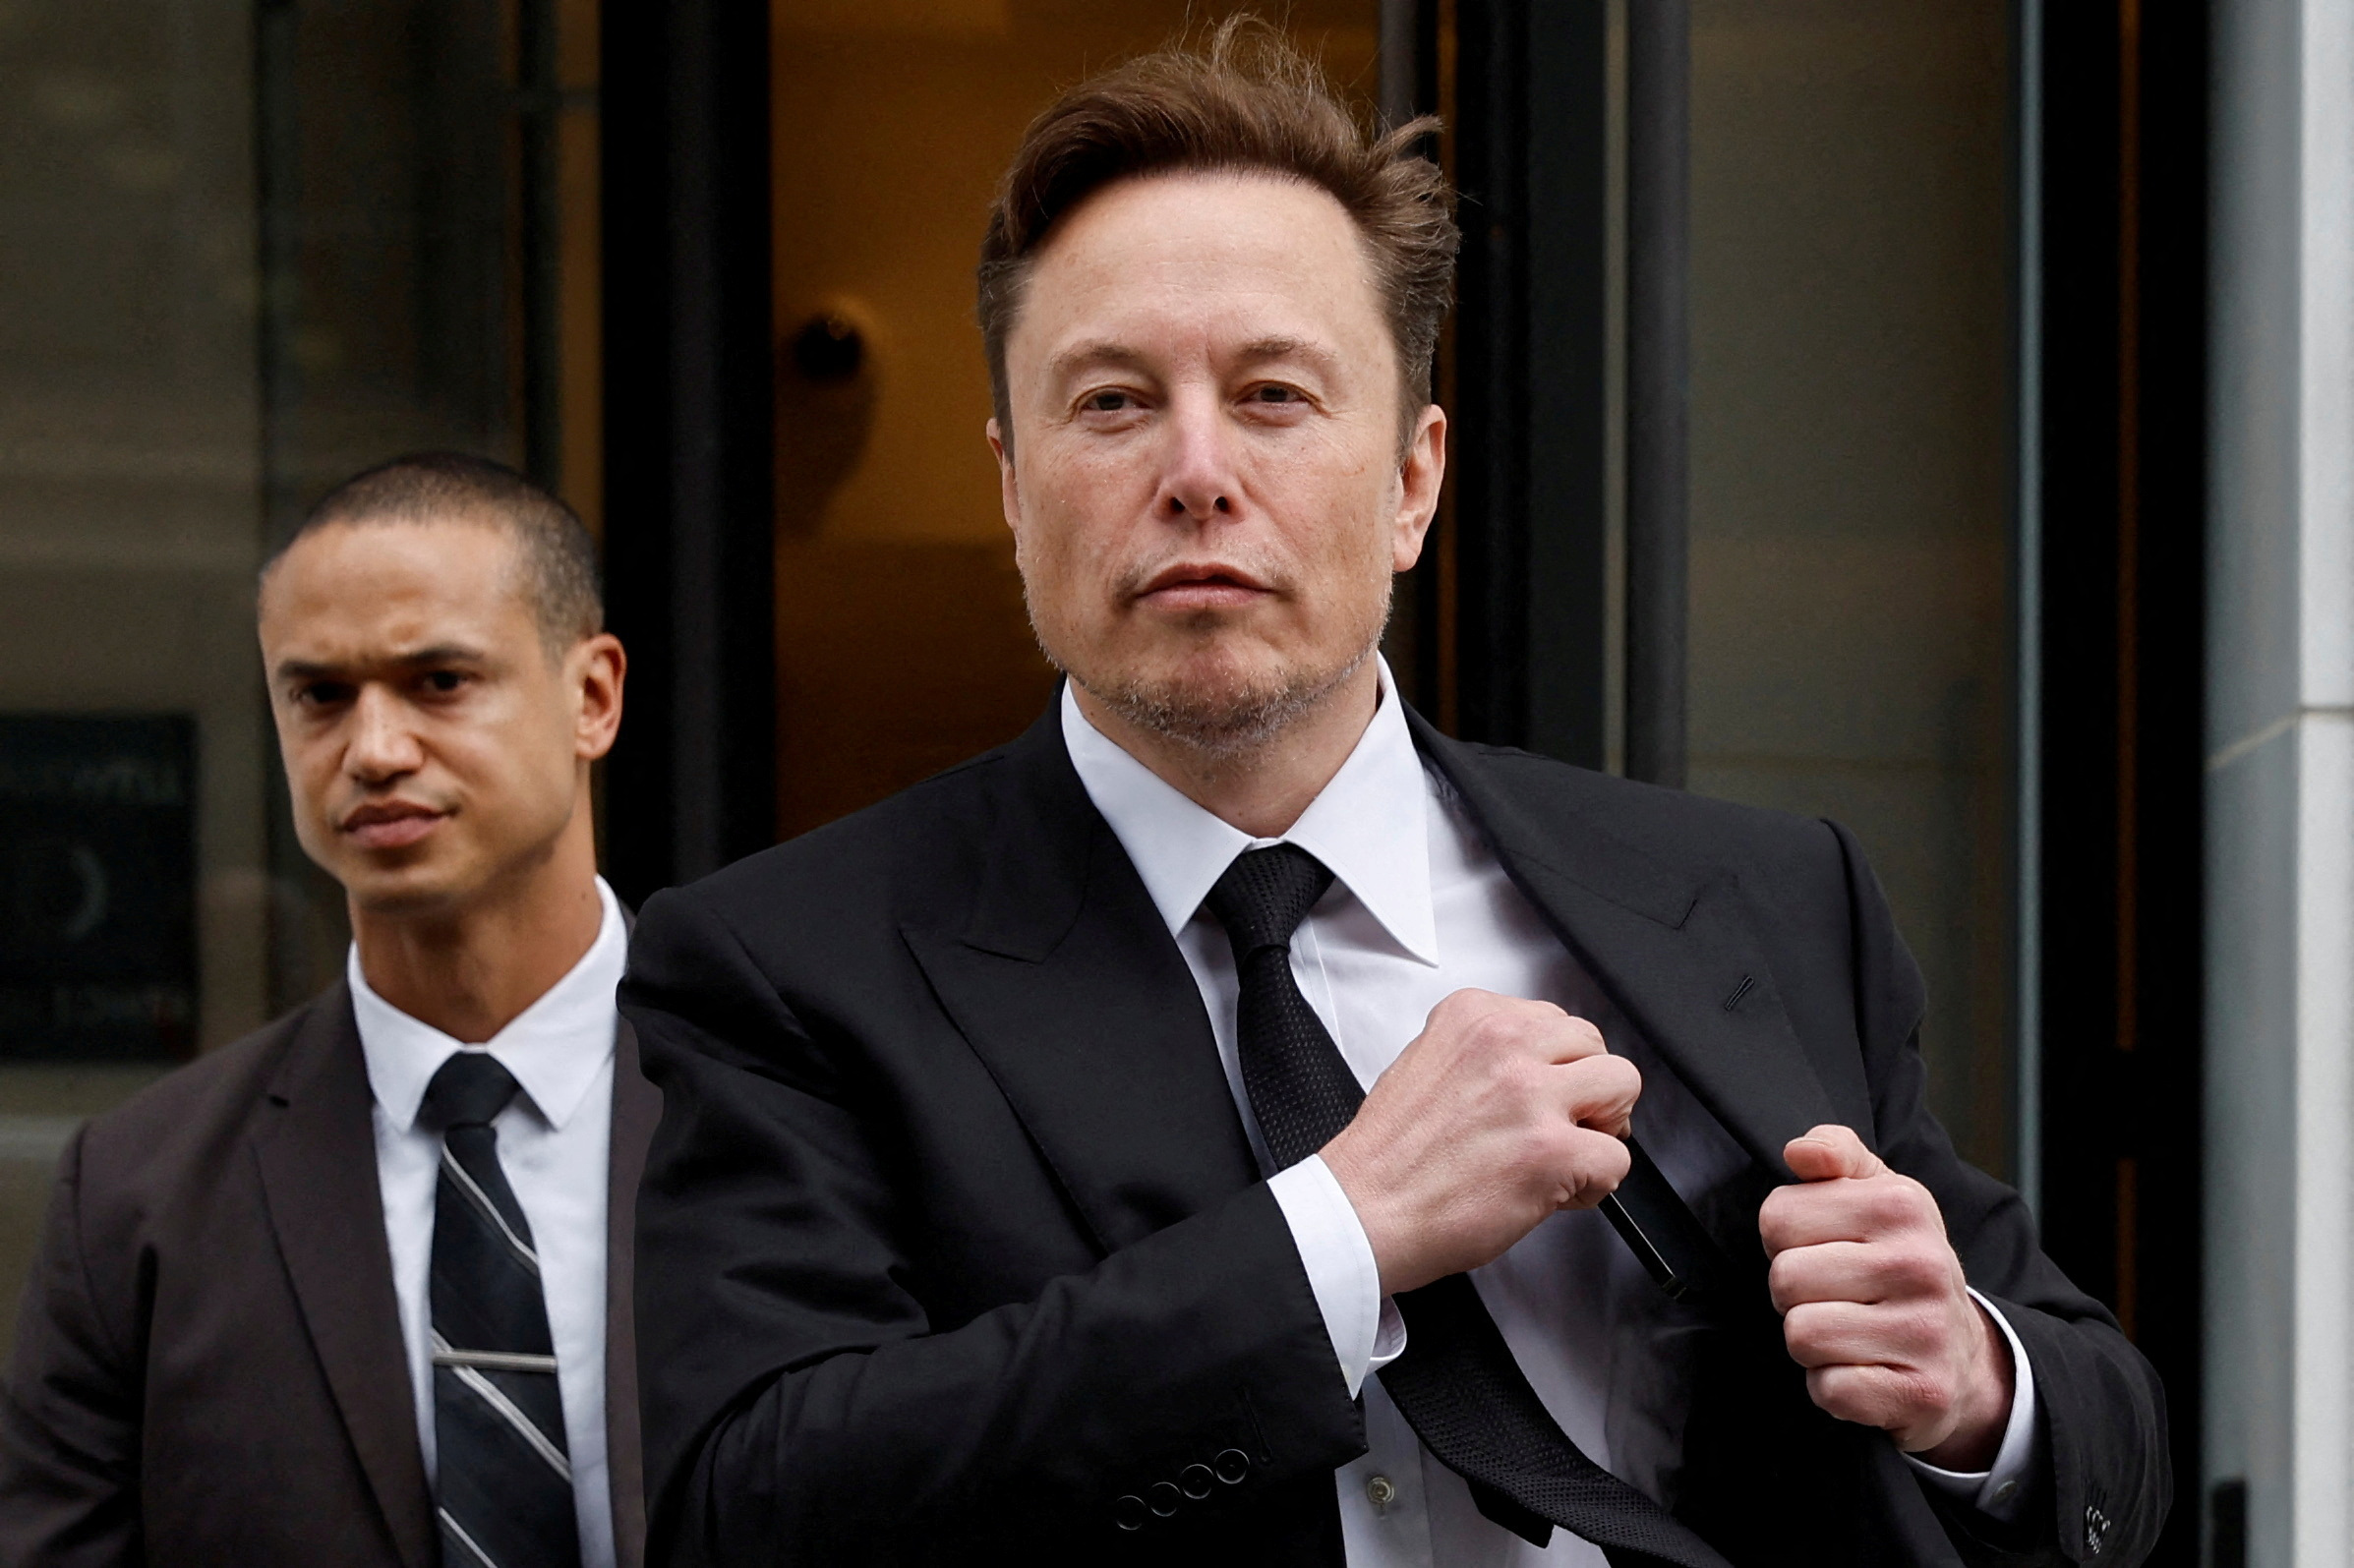 Tesla CEO Musk departs the company’s local office in Washington